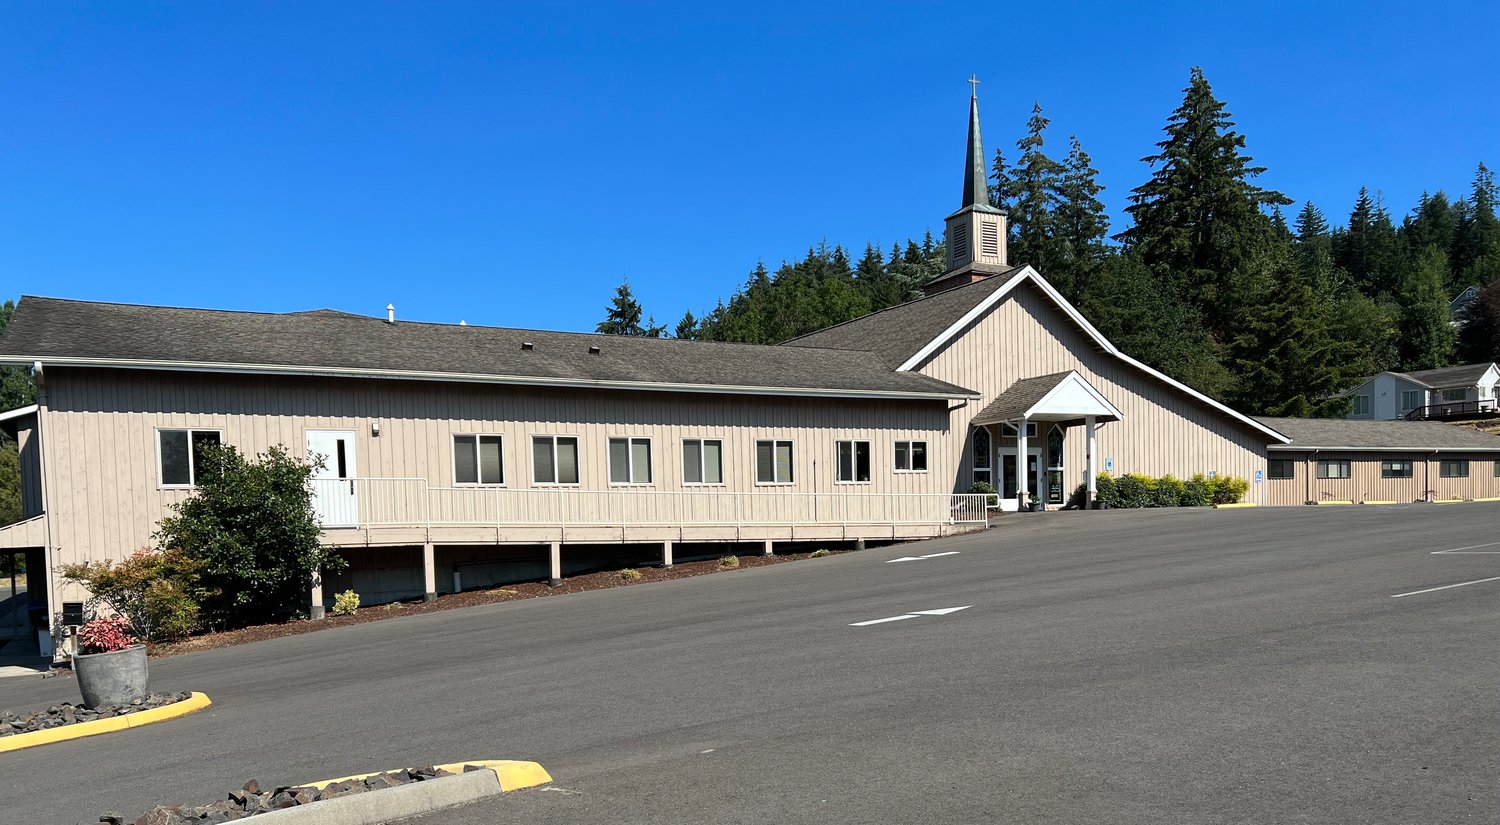 St. John’s Lutheran Church in Chehalis is pictured in this photograph provided by the church.